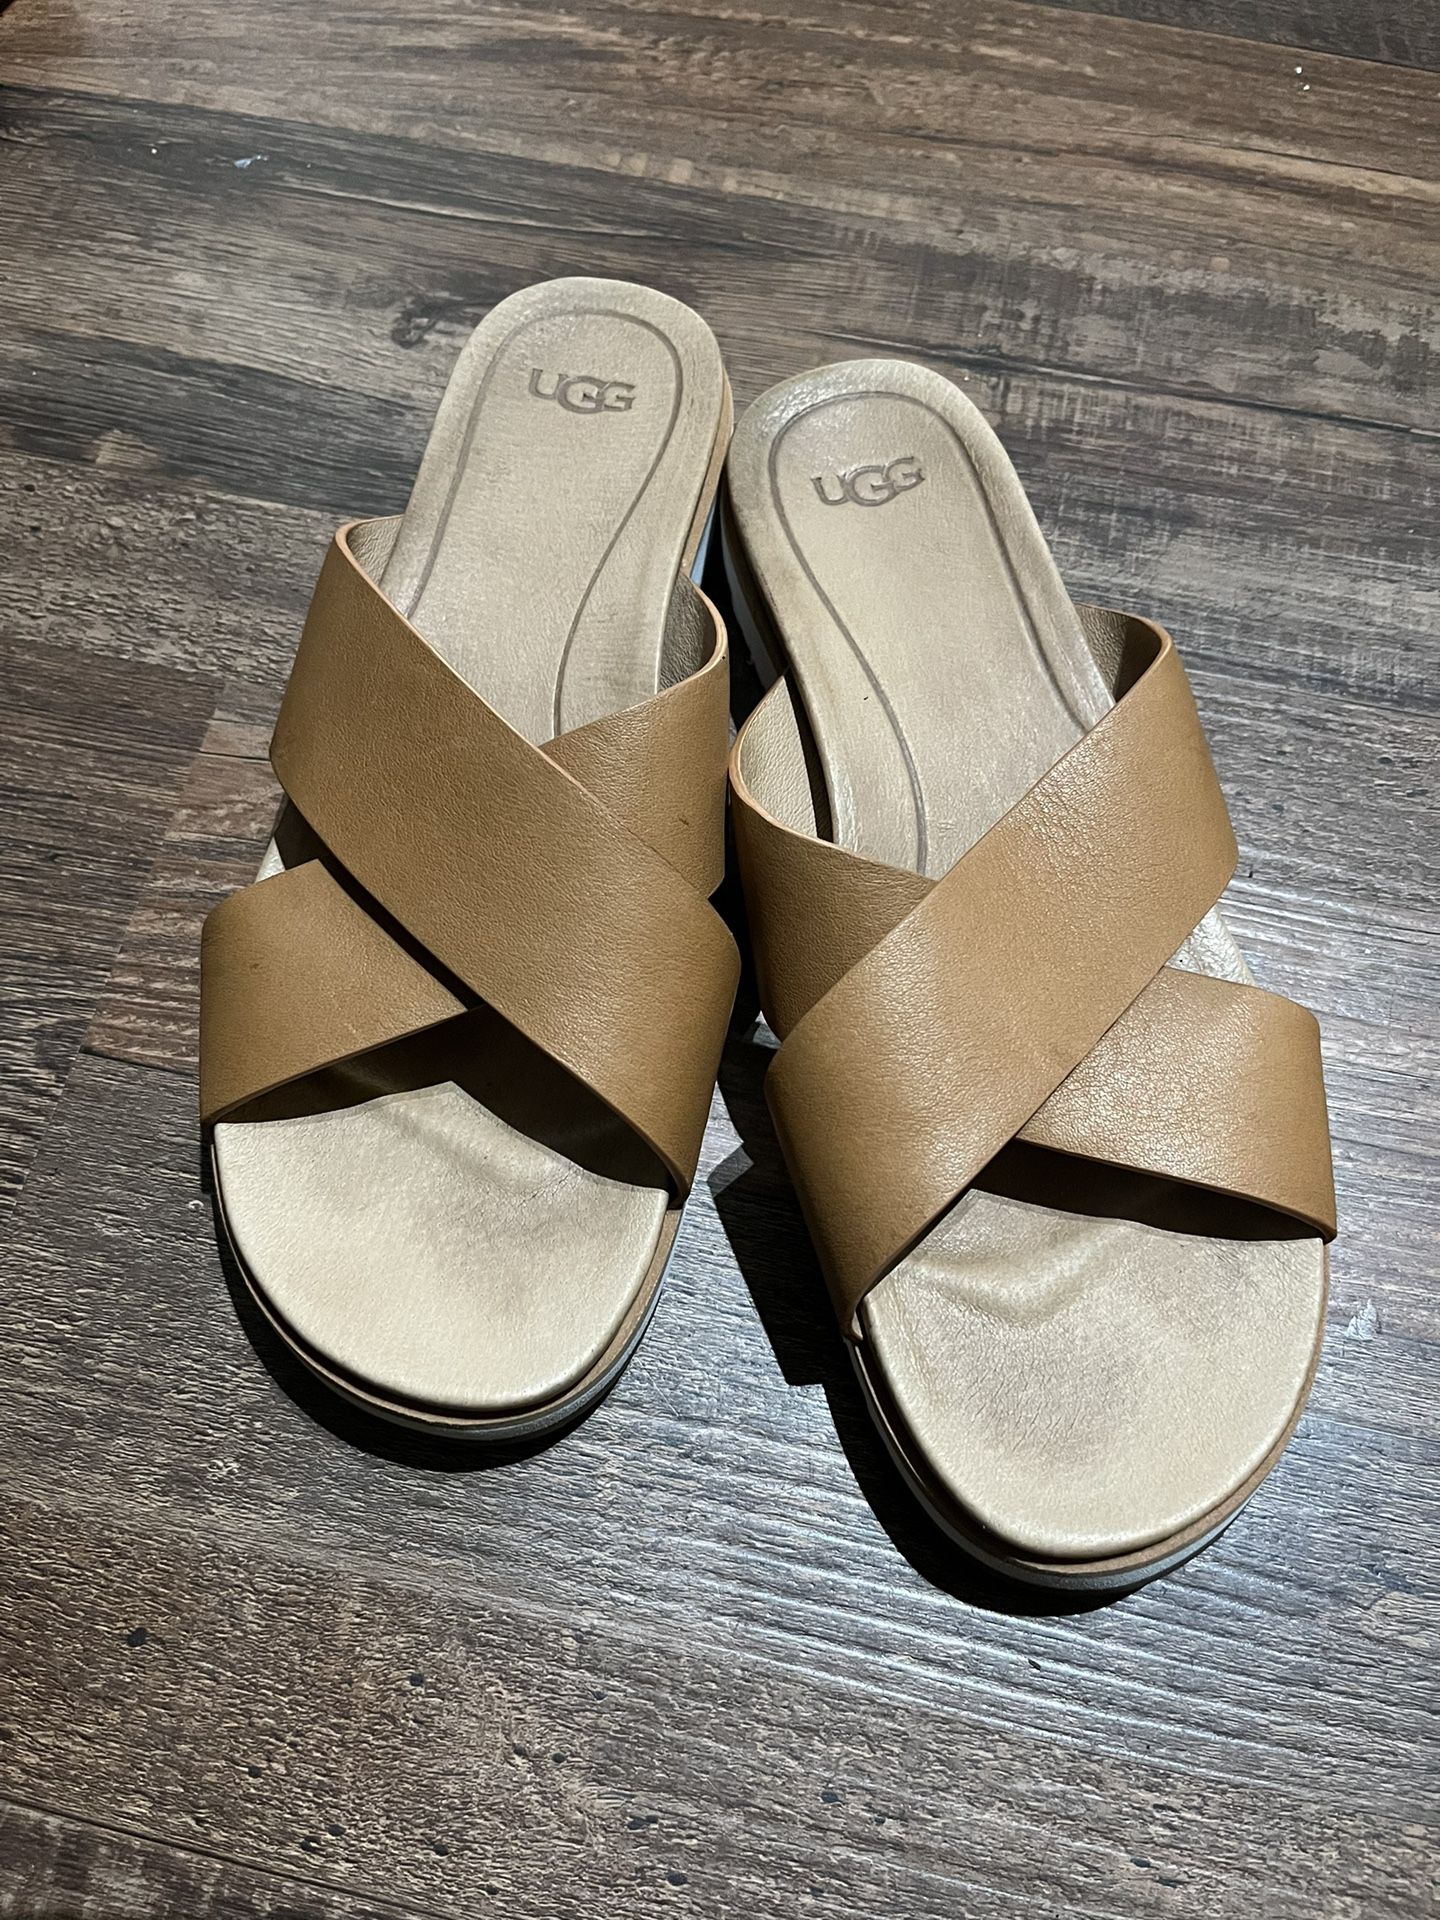 Uggs Sandals leather Size 8.5 Women 